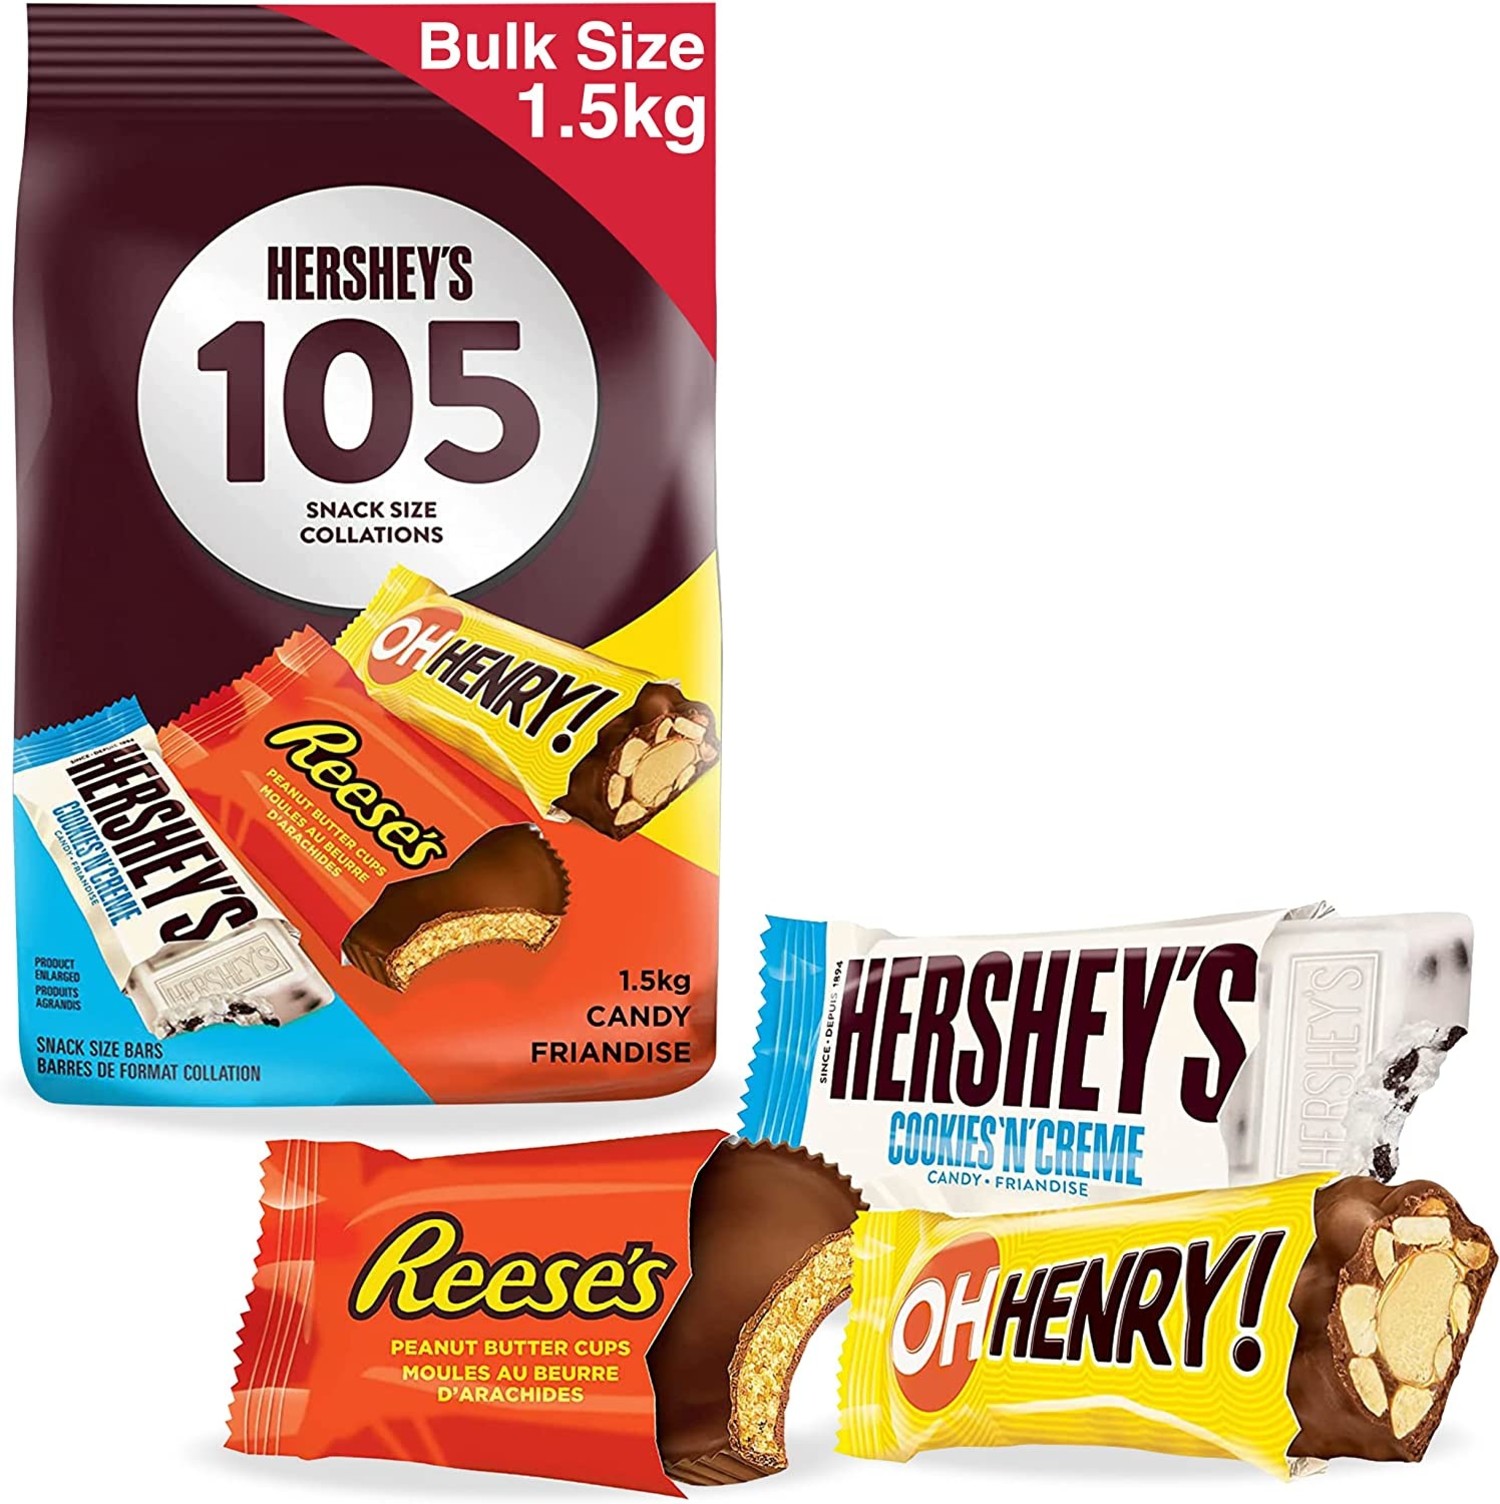 HERSHEY'S 105ct Assorted Valentine's Day Chocolate Candy, Candy to Share,  Bulk Candy, Valentine's Day Gift, - 1.5kg - Includes Reese's, OH Henry! &  HERSHEY'S Snack Sized Bars - The Amazing Home Stores